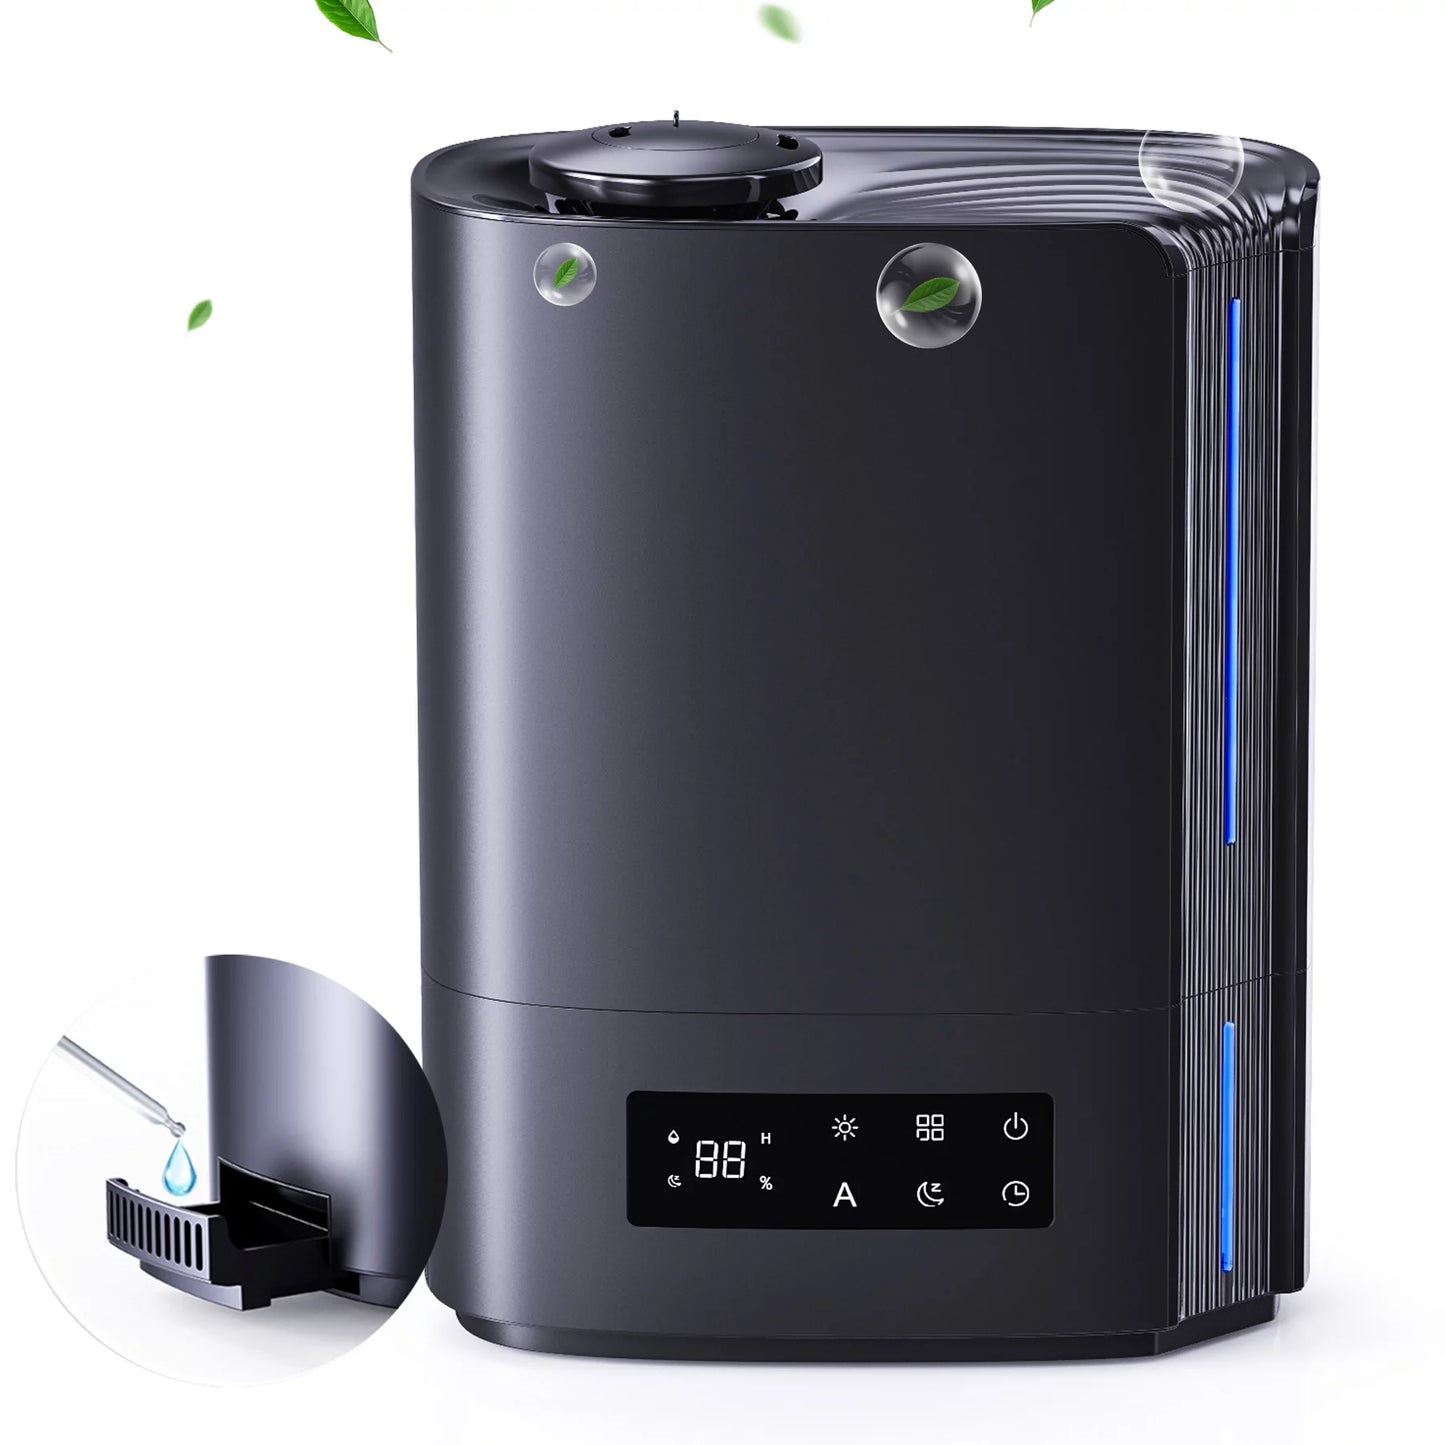 KLOUDIC Top-Fill 6L Cool Mist Large Humidifier for Home Air Vaporizer with Humidistat and Timer